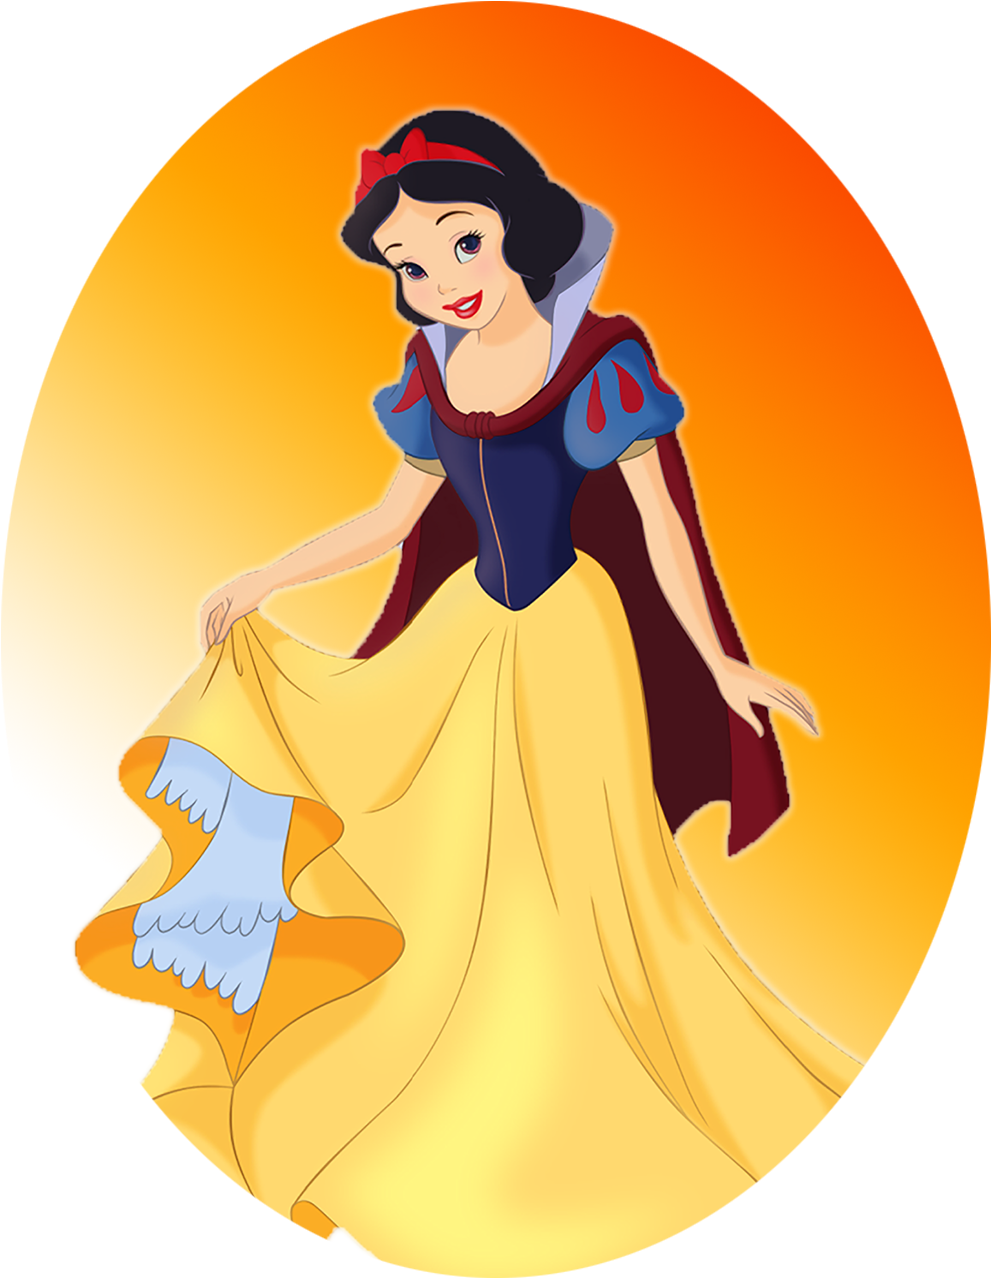 Snow White Classic Pose PNG